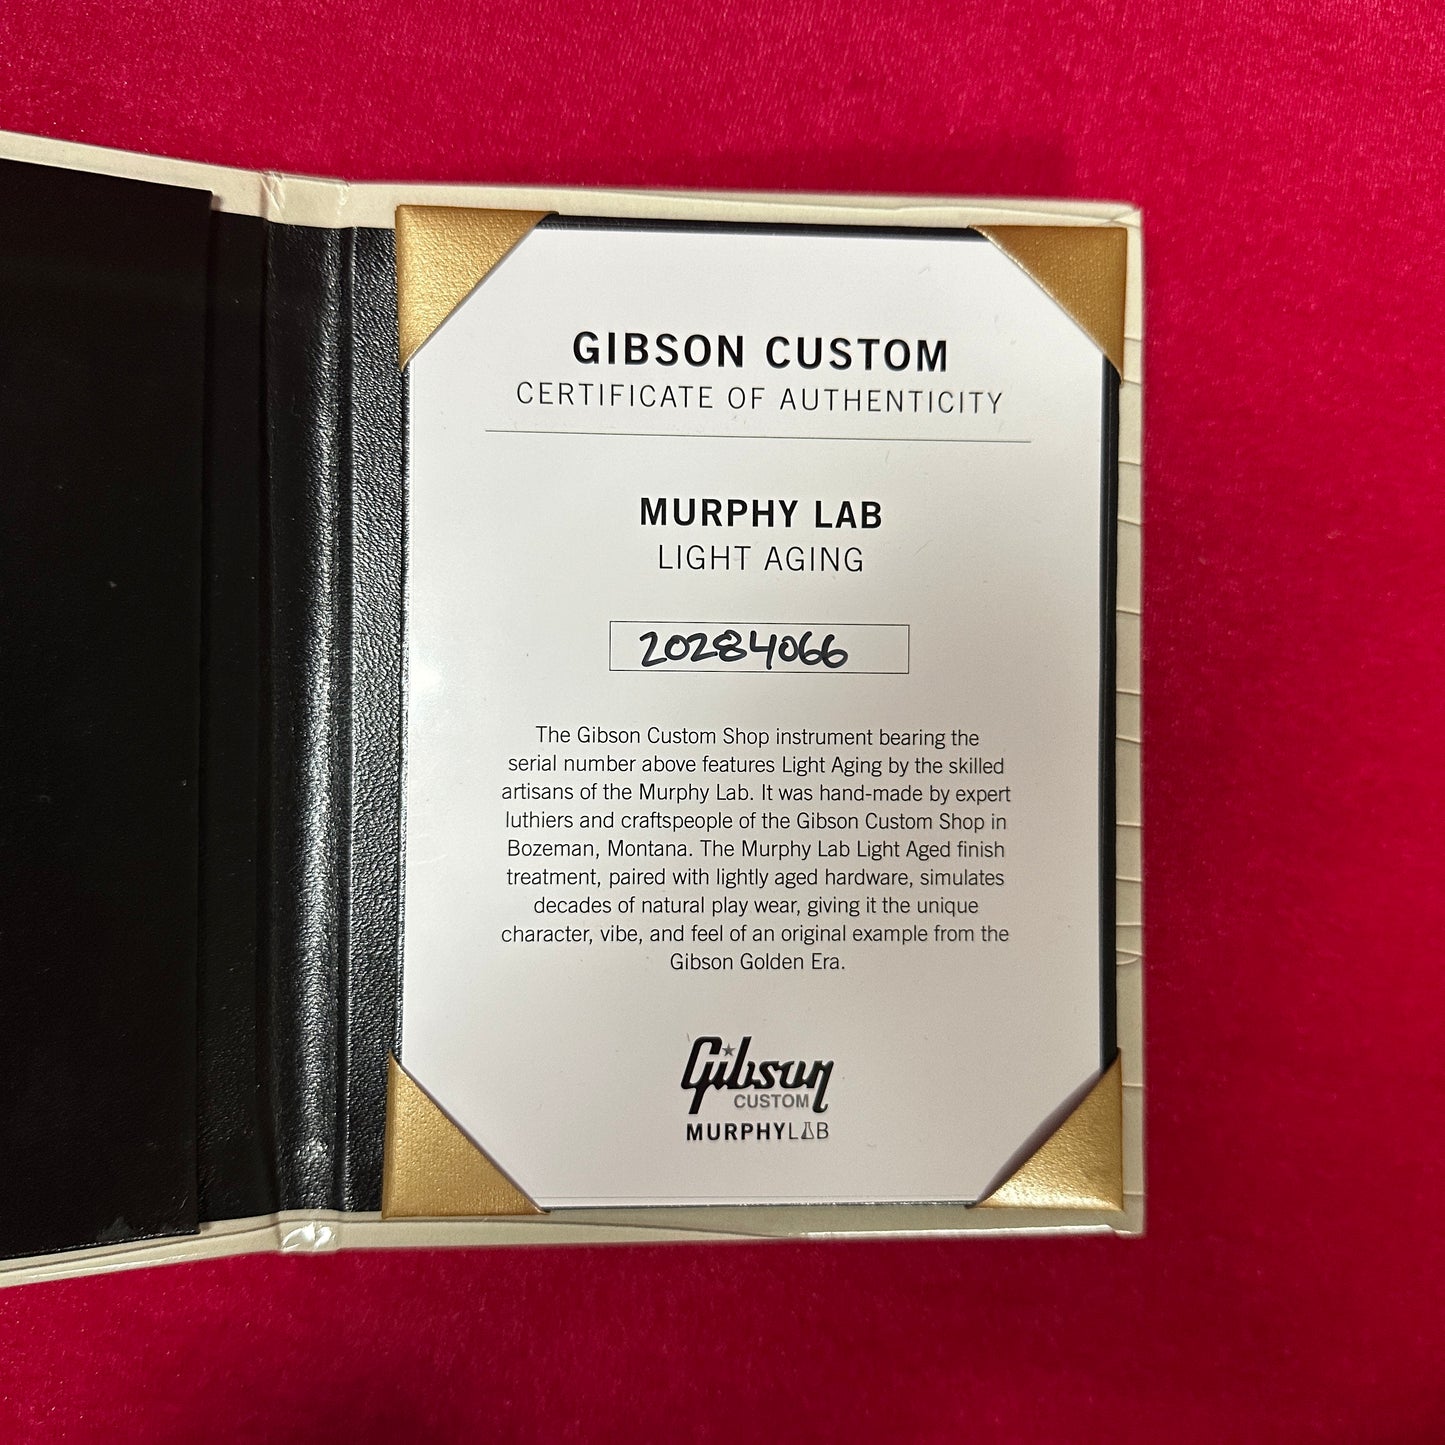 Certificate of authenticity for Used 2024 Gibson 1957 SJ-200 Murphy Lab Light Aged Vintage Sunburst.